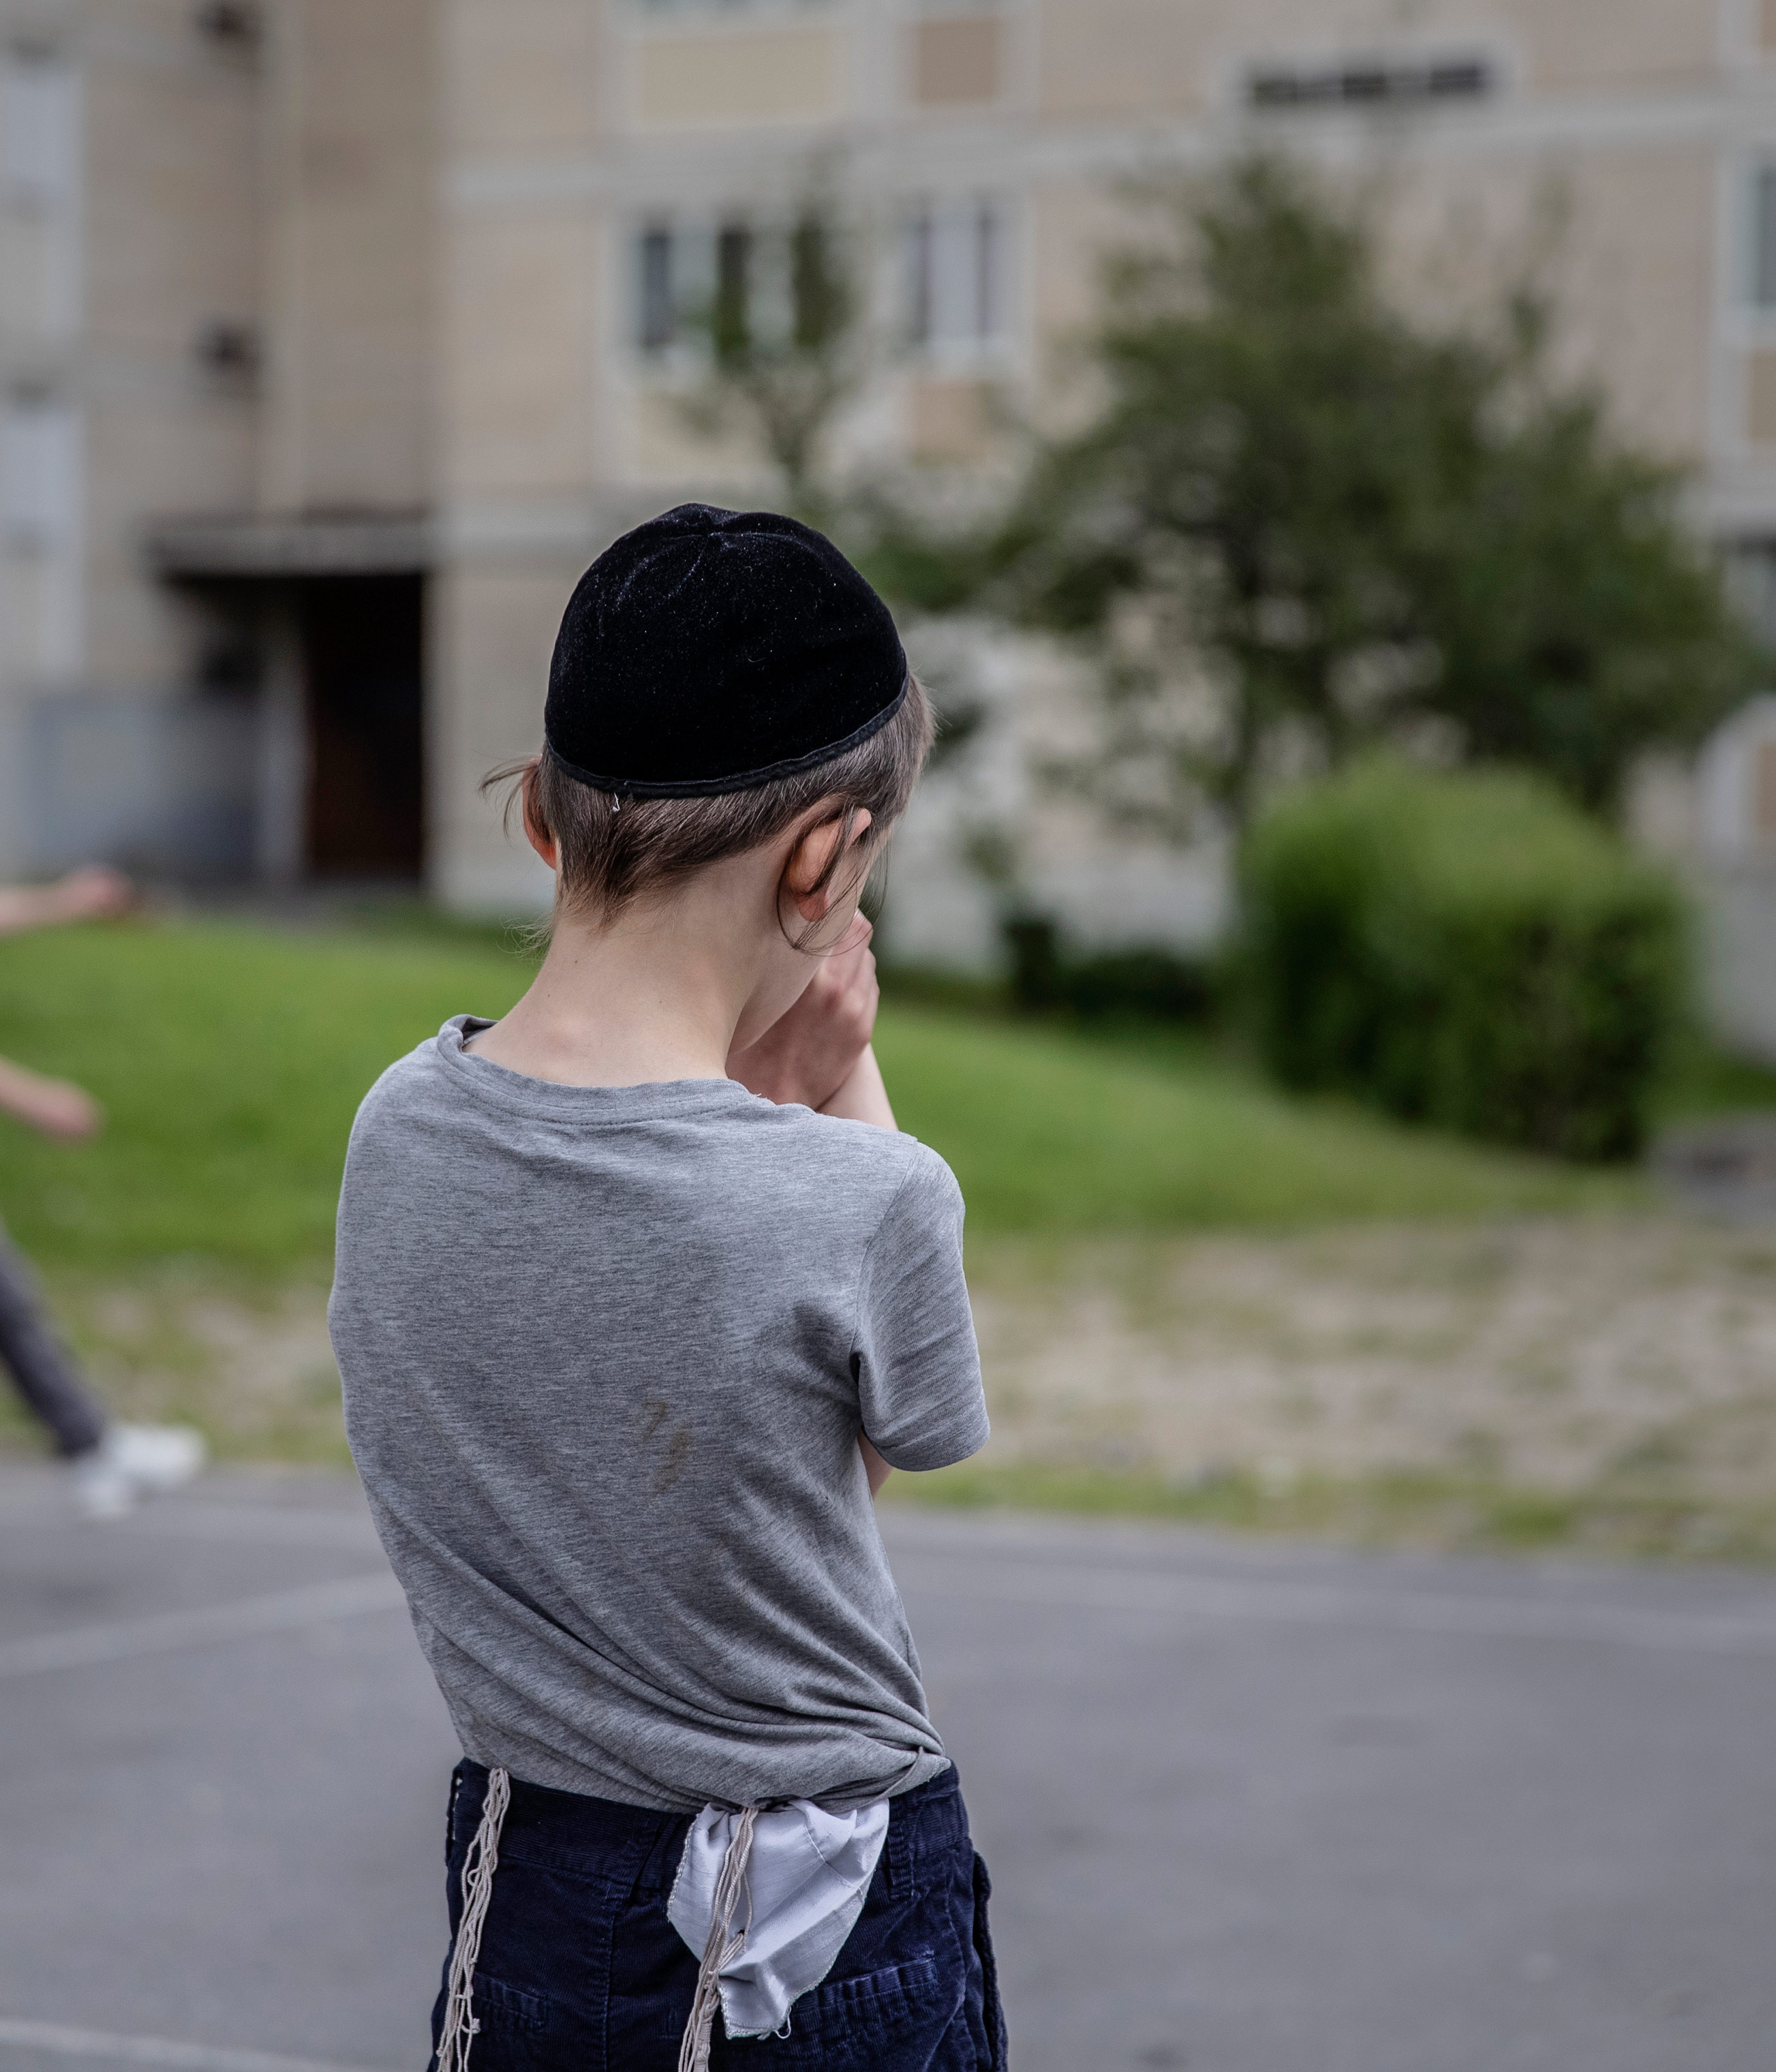 Sarcelles, France. In France, government records showed a 74% spike in anti-Semitic attacks between 2017 and 2018. (Magnus Wennman for TIME)